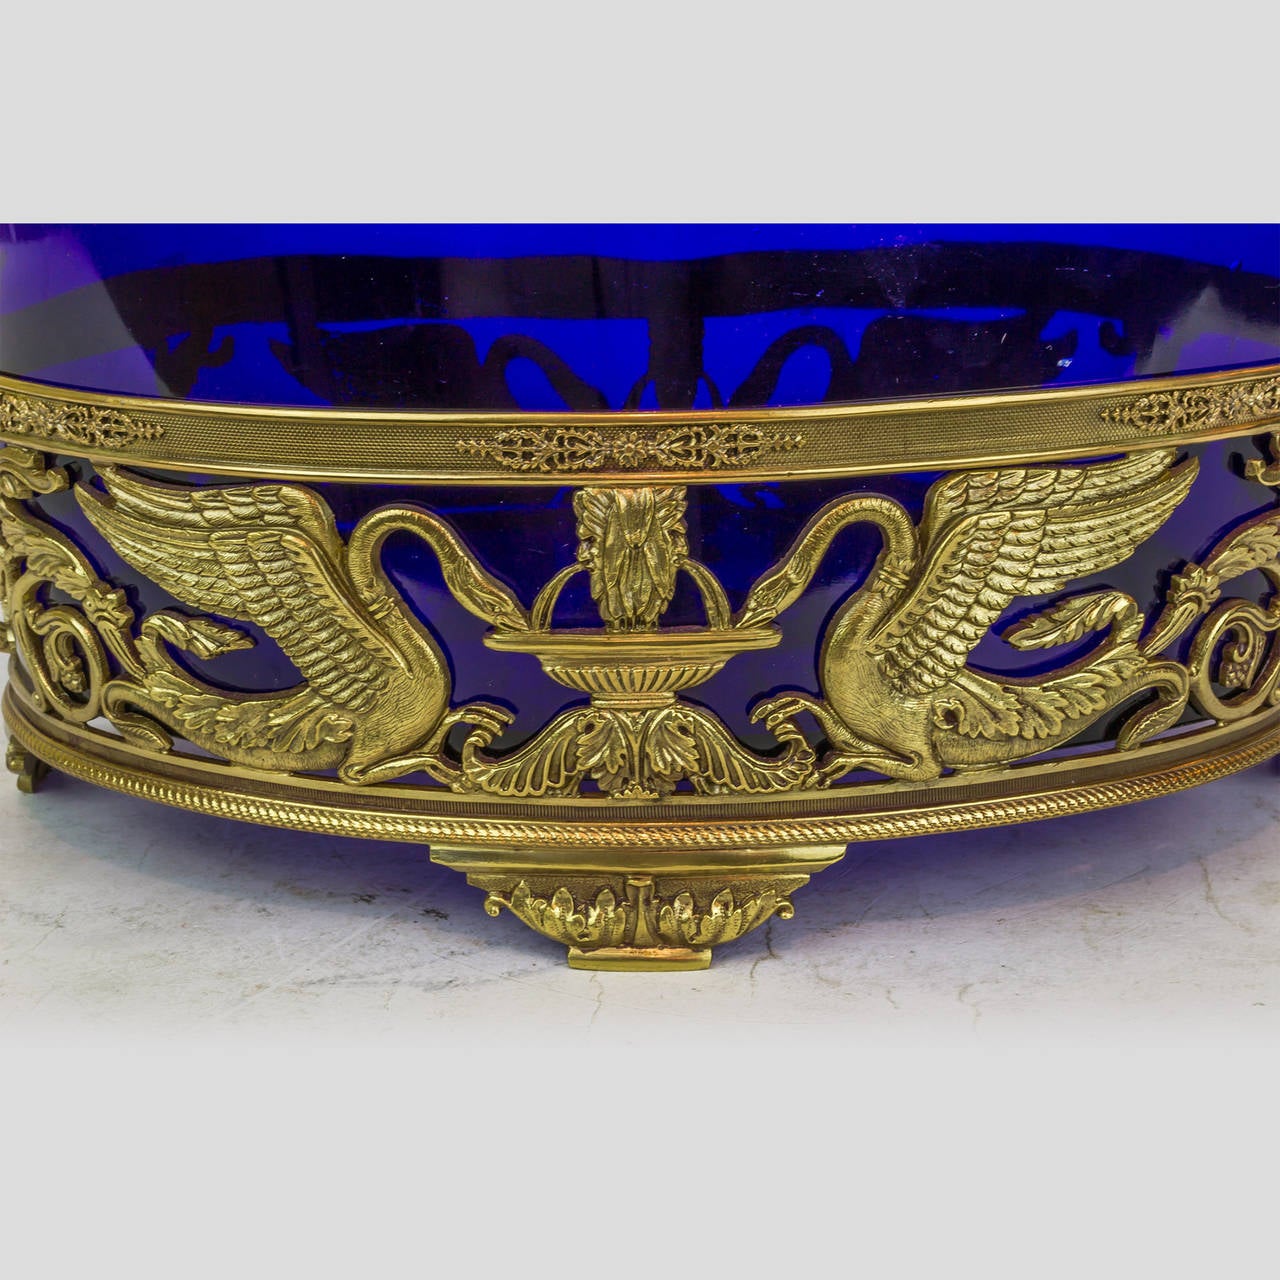 An Oval Silver Plated Neoclassical Centerpiece with Blue Glass Insert
Stock Number: DA82